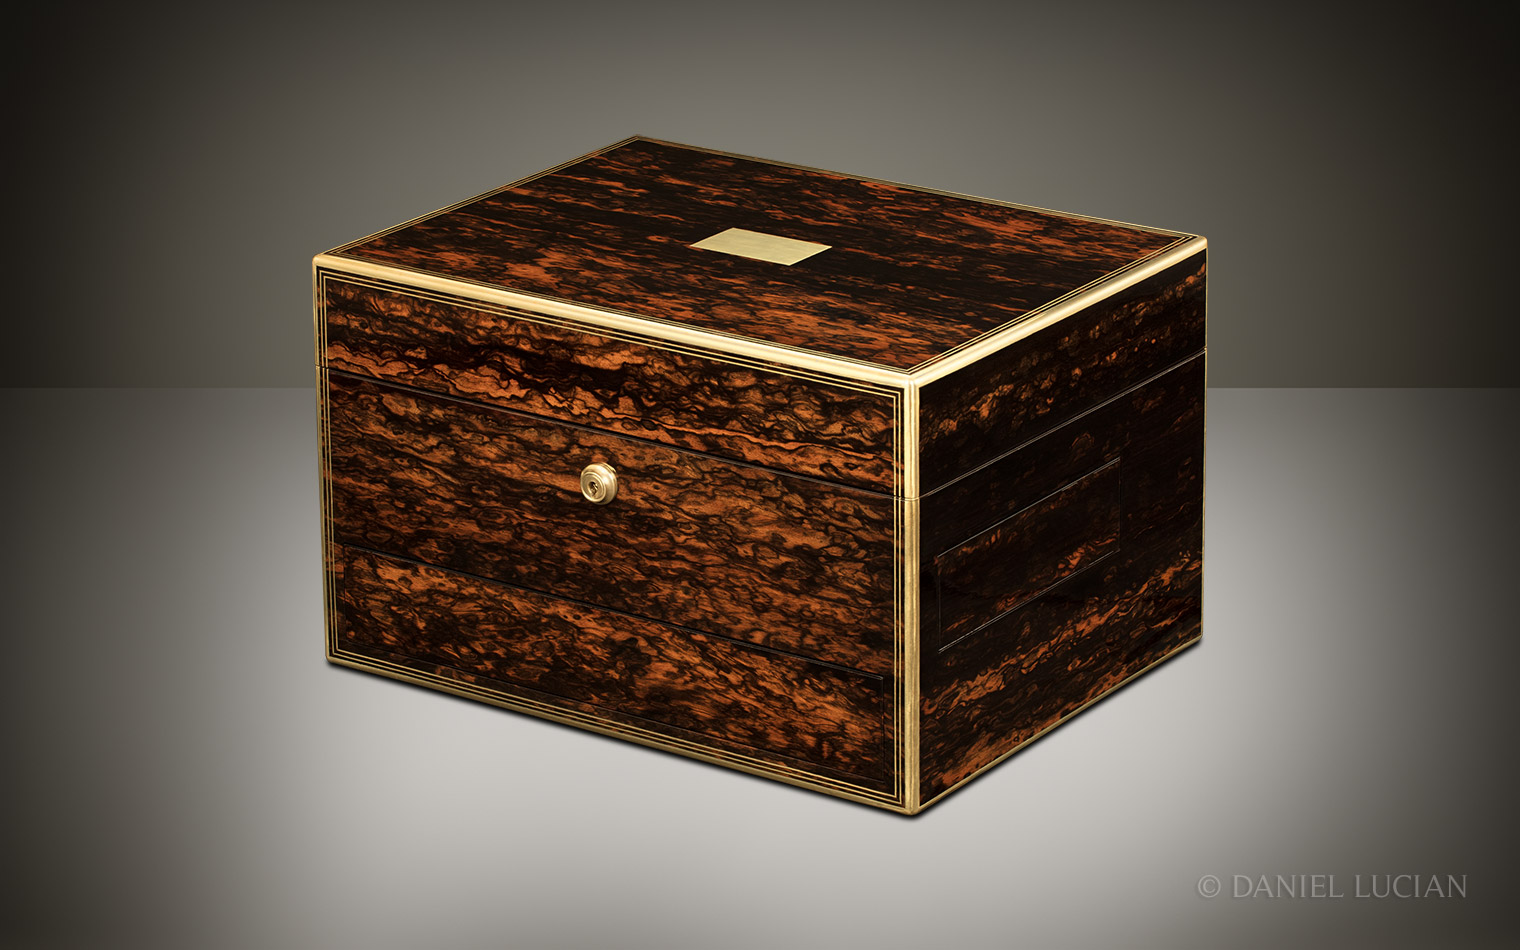 Antique Jewellery Box in Coromandel with Two Spring-Loaded Drawers